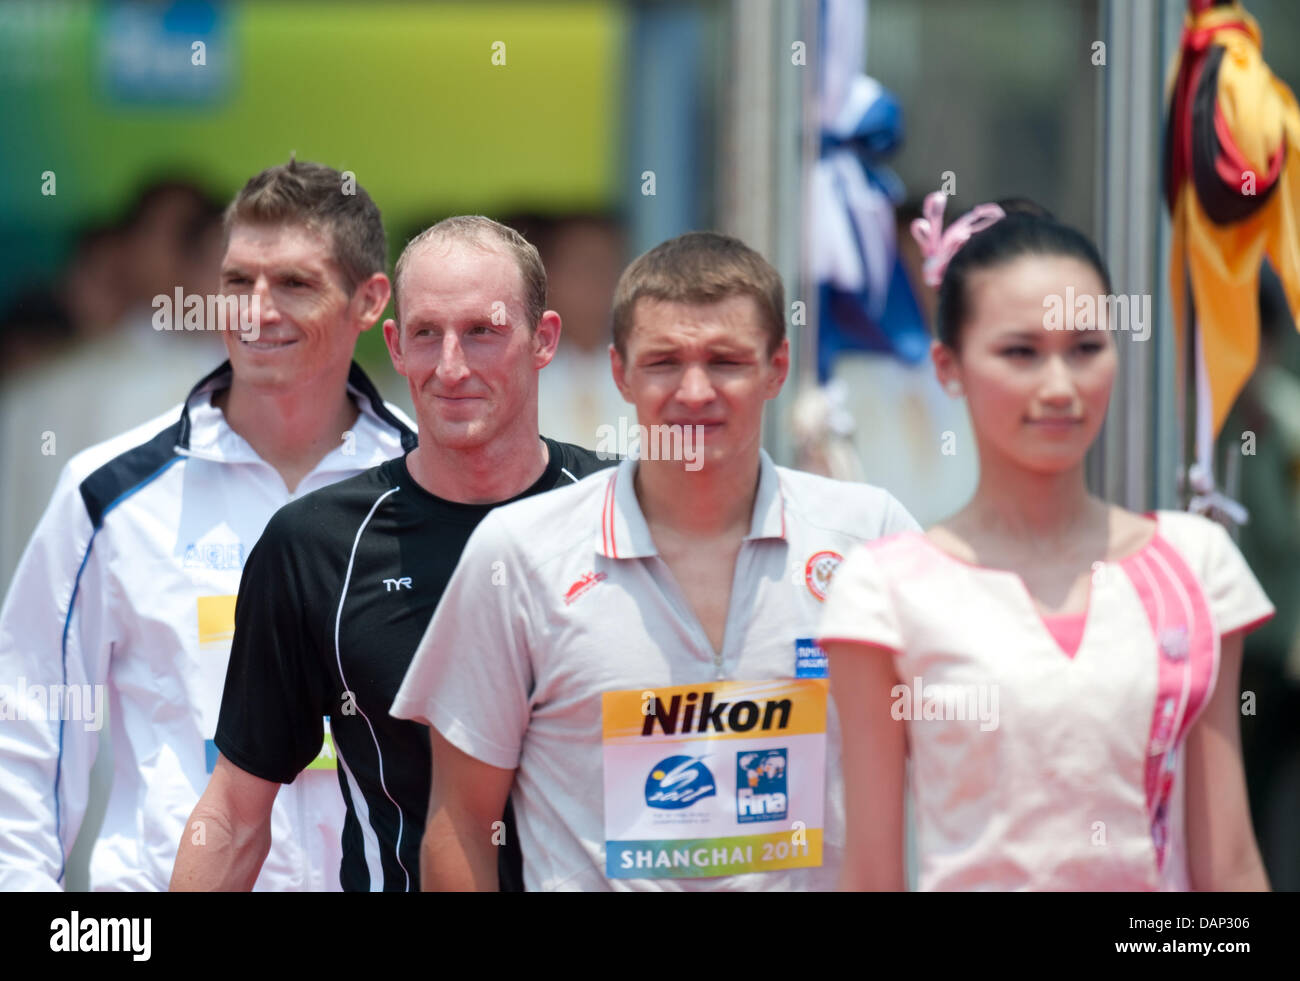 Thomas Lurz (2nd L) from Germany on the way to the medal ceremony for the 5km open water event at the 2011 FINA World Swimming Championships, Shanghai, China, 22 July 2011. Lurz gained the first place and won gold, Spyros Giannotis (R) from Greece became second, Jevgenij Drattsev (2.R) from Russia third. Photo: Bernd Thissen dpa  +++(c) dpa - Bildfunk+++ Stock Photo